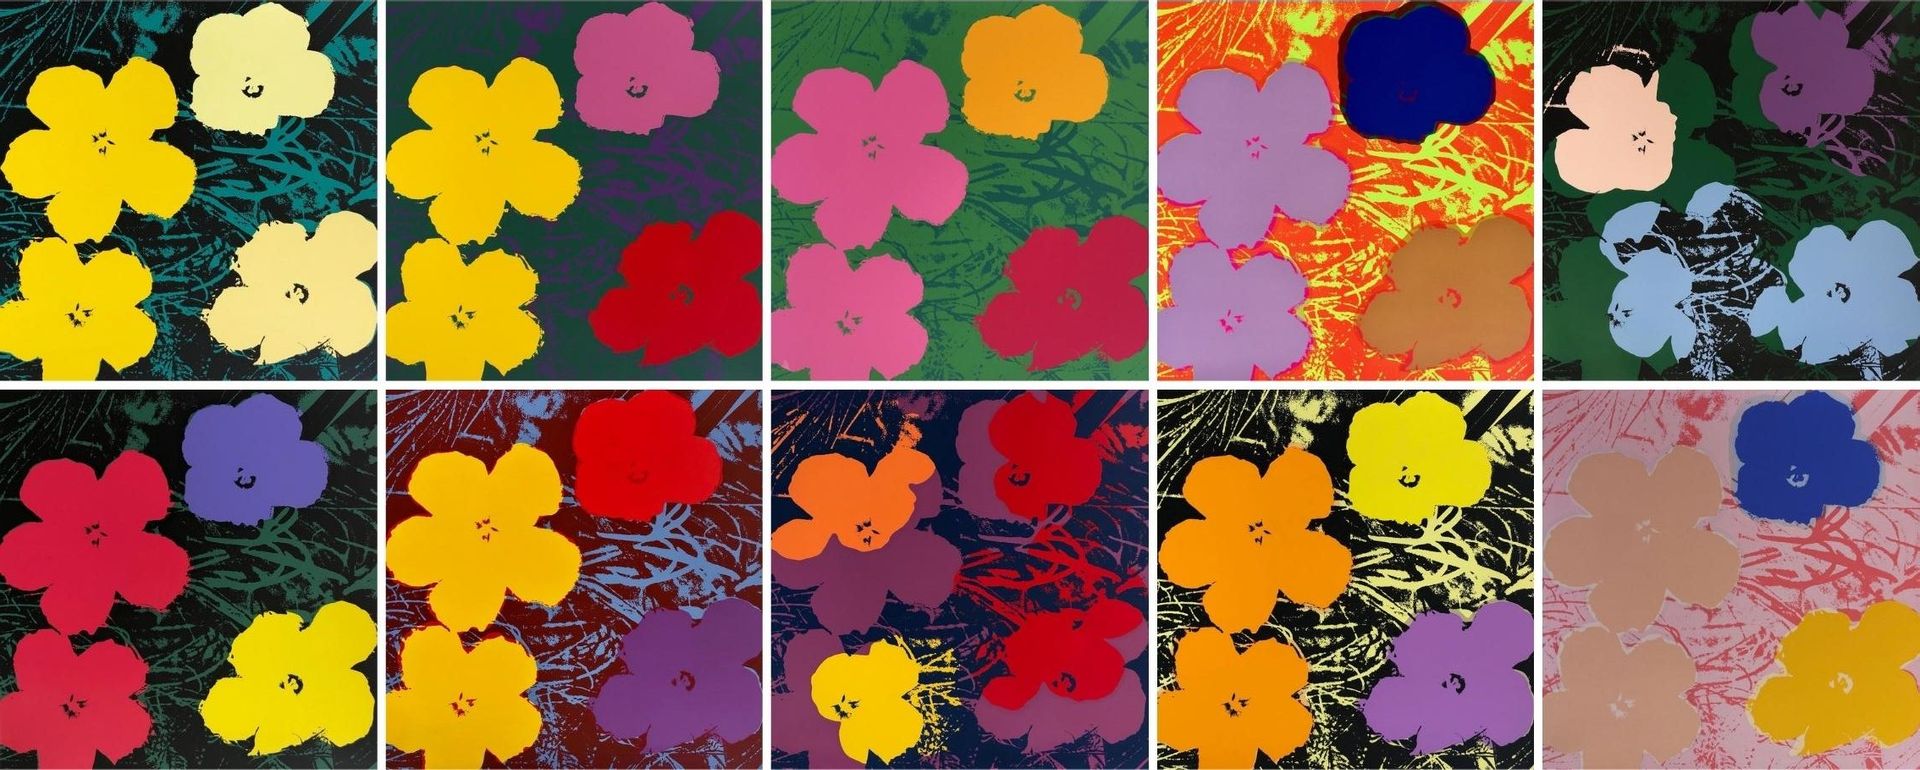 an image of 10 artworks by andy warhol in a portfolio titled 'flowers'. these artworks are displayed in a grid format with two rows and five columns. the artworks all feature four flowers ina cartoon-like, pop art style, in various colourways. all 10 colourways are brightly coloured and feature yellow, pink, red, blue, orange, and green. these are sunday b morning prints for sale